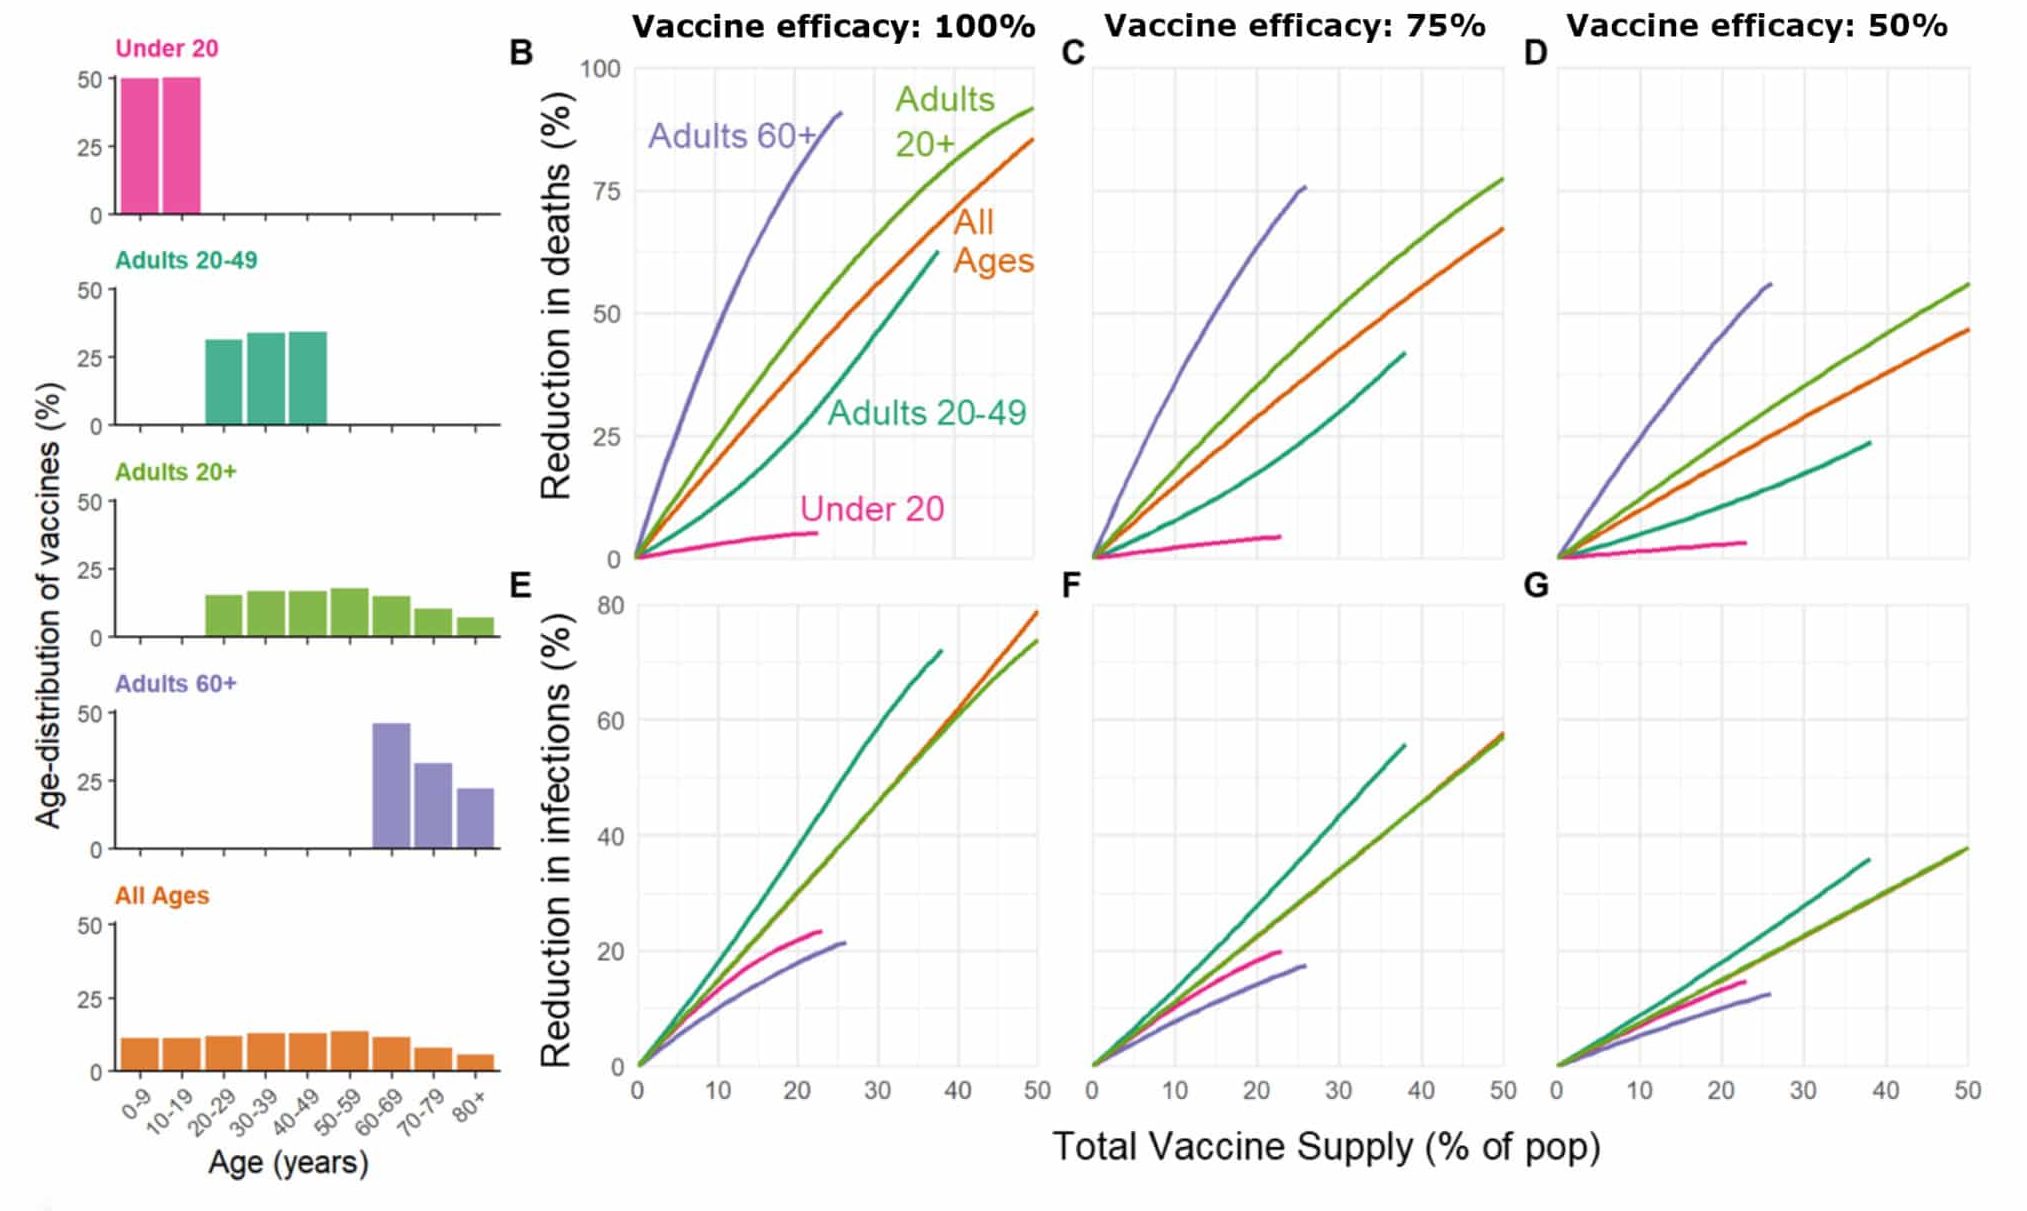 Vaccine rollout scenarios developed by Bubar et al. include five different ways of distributing the first doses of vaccines, presented in the left panel. The scenarios show the same pattern: to prevent deaths, vaccinate the elderly first, and then move on to other, healthier groups or the general population.